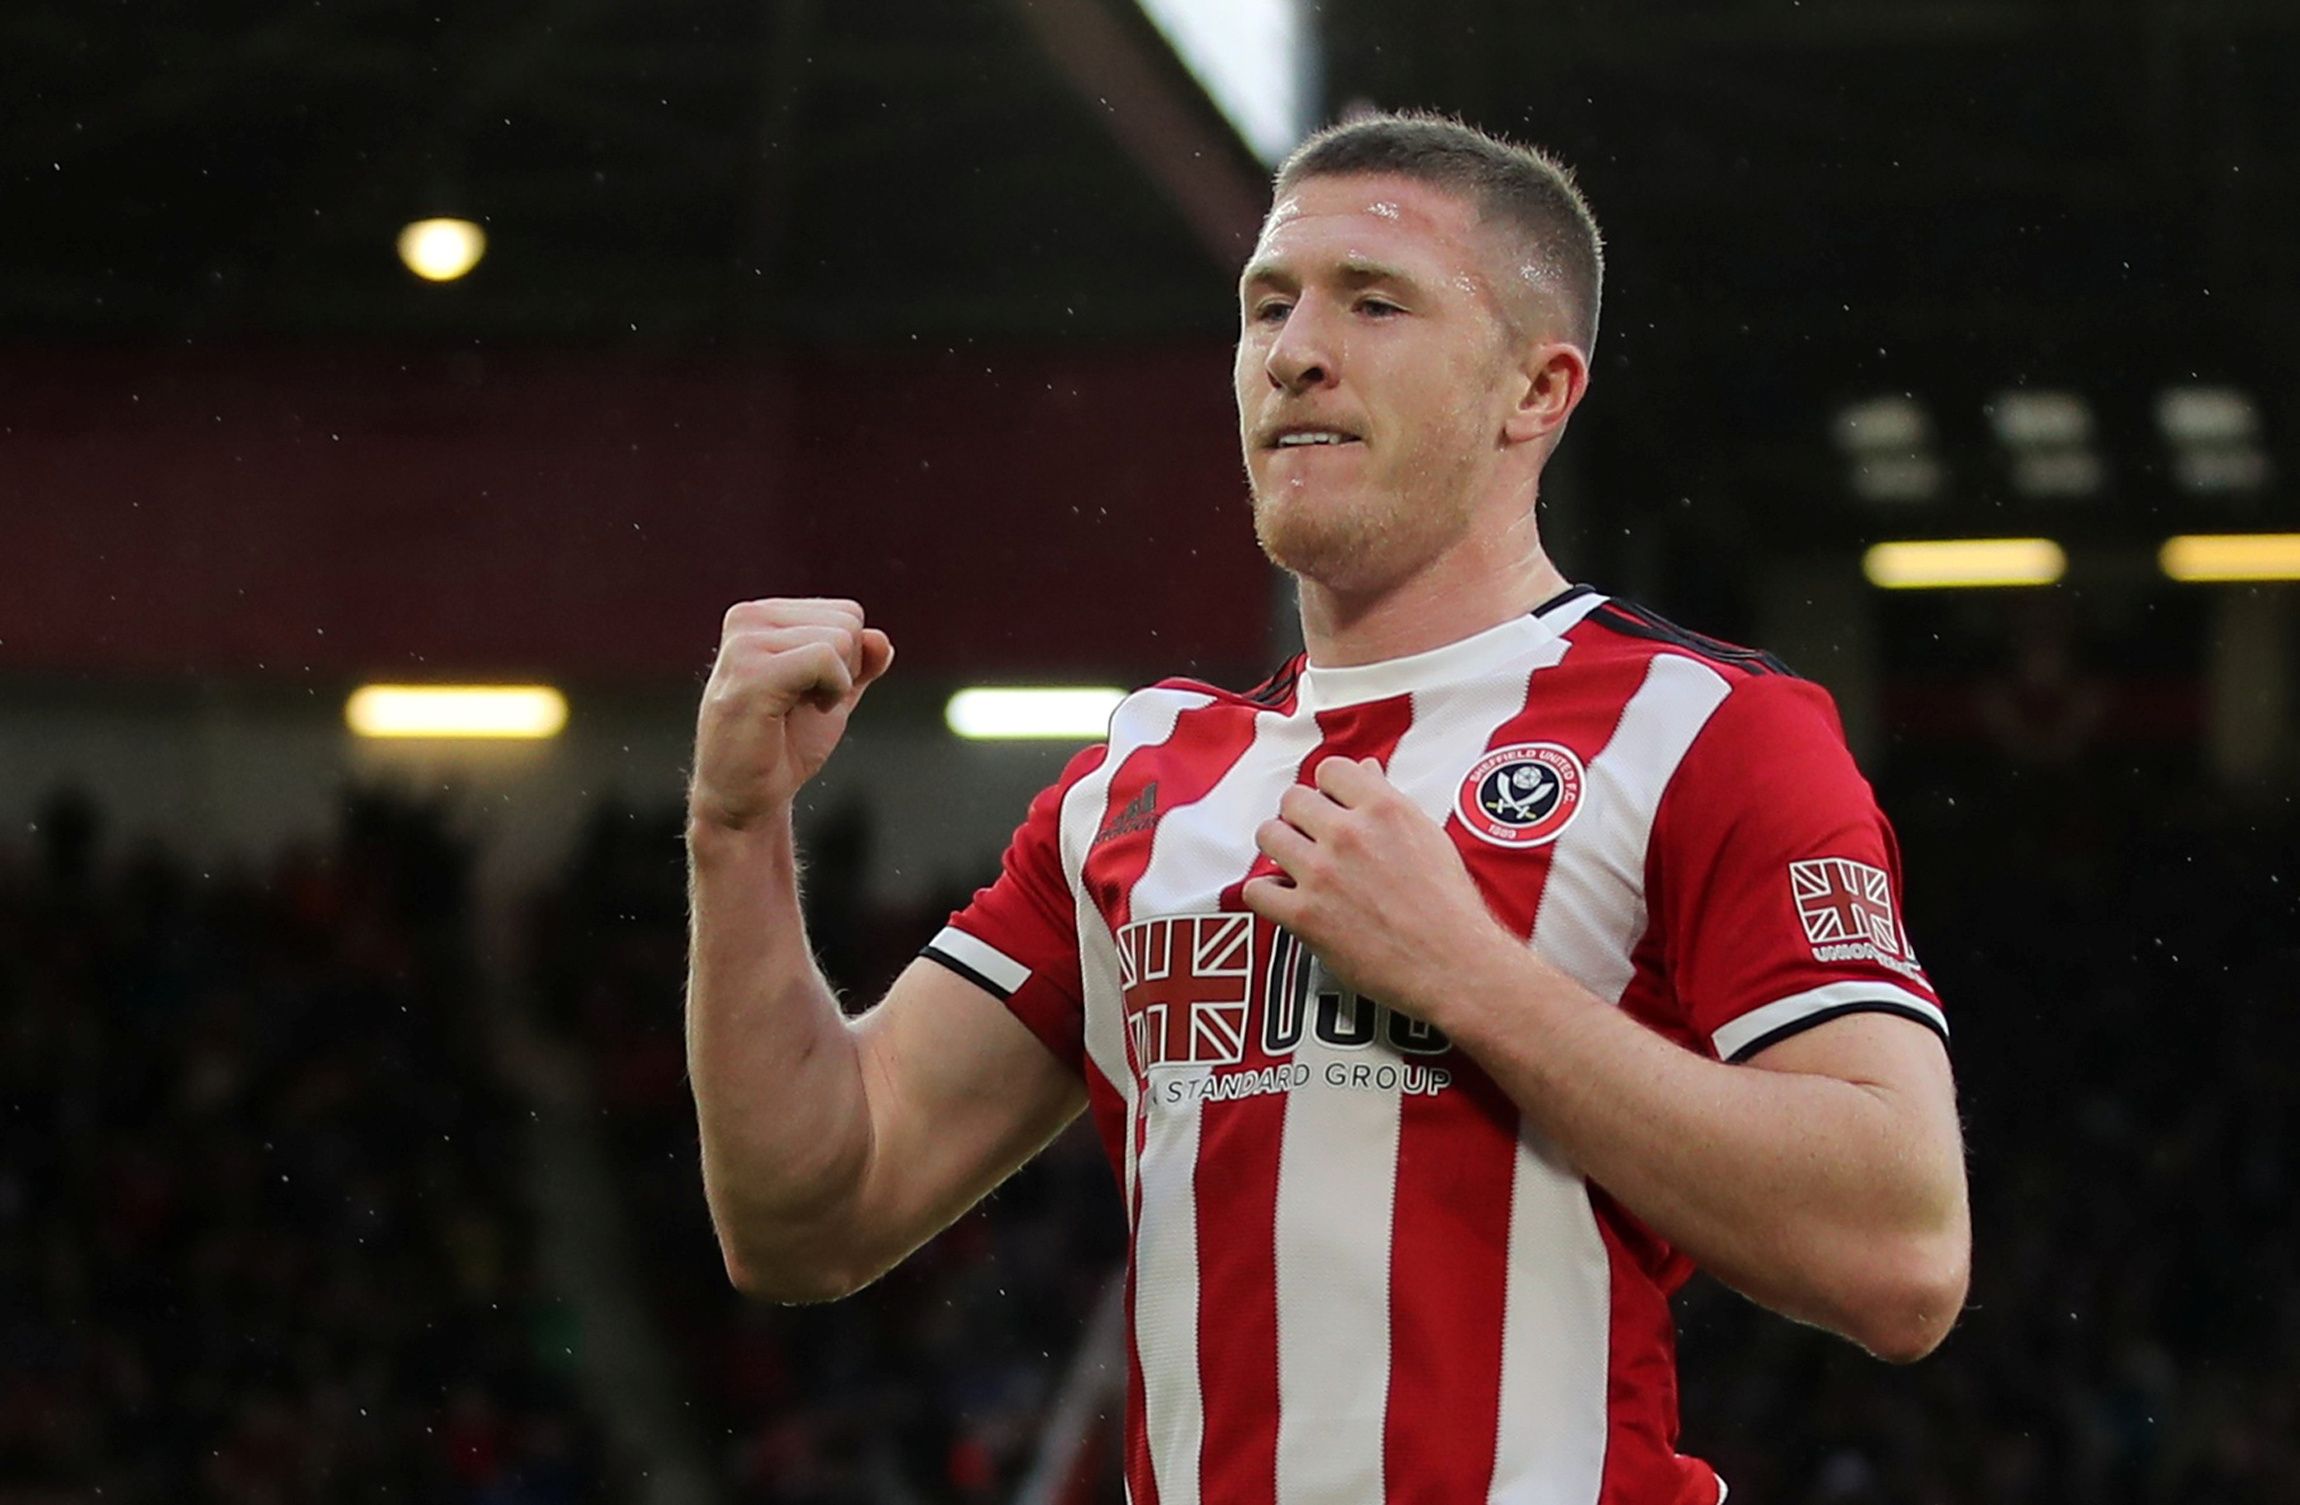 Soccer Football - Premier League - Sheffield United v Burnley - Bramall Lane, Sheffield, Britain - November 2, 2019  Sheffield United's John Lundstram celebrates scoring their first goal   Action Images via Reuters/Molly Darlington  EDITORIAL USE ONLY. No use with unauthorized audio, video, data, fixture lists, club/league logos or 